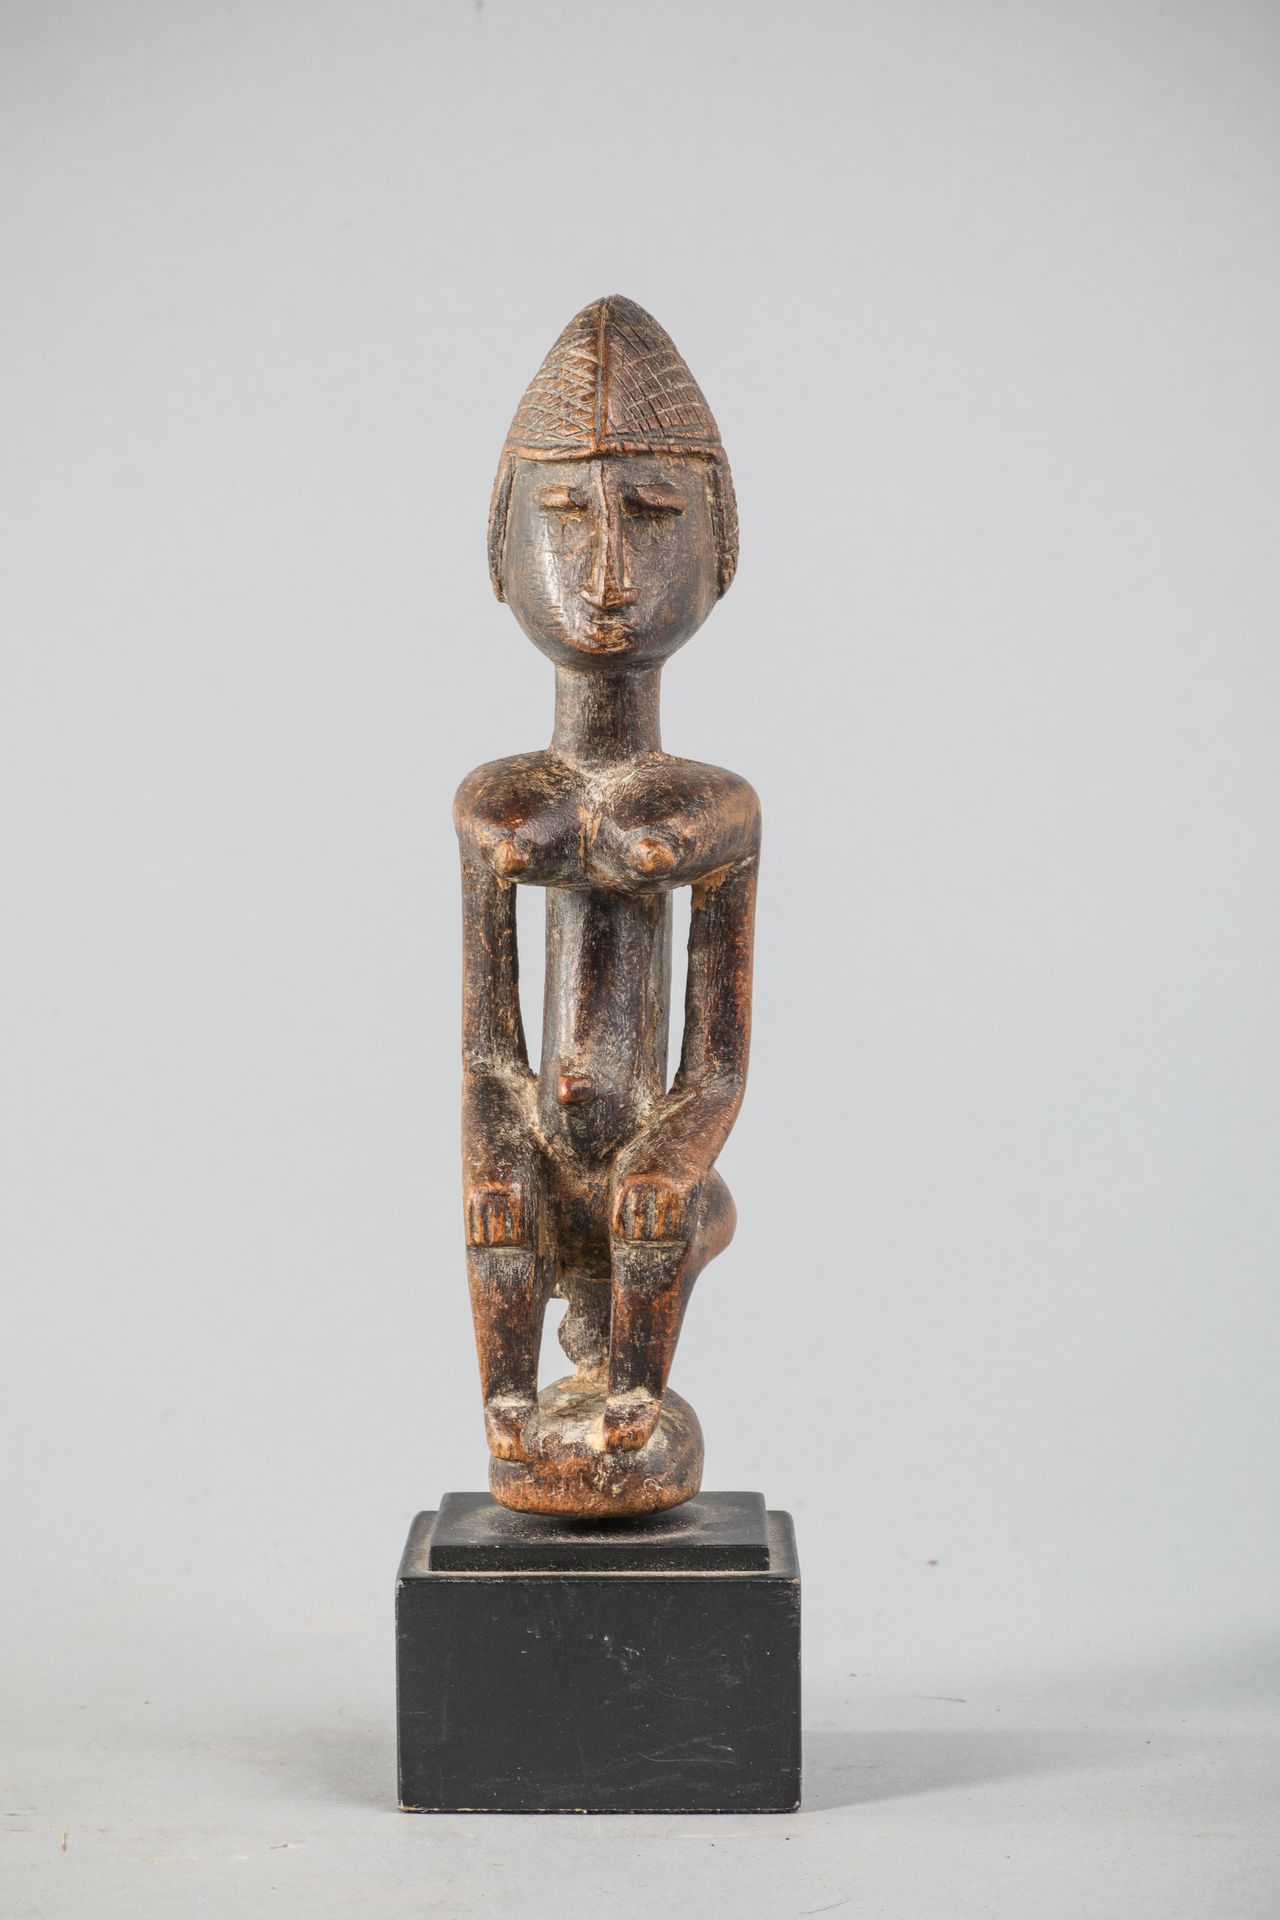 Null Dogon female figure, Mali, depicted seated. Wood, brown patina. H 20cm.